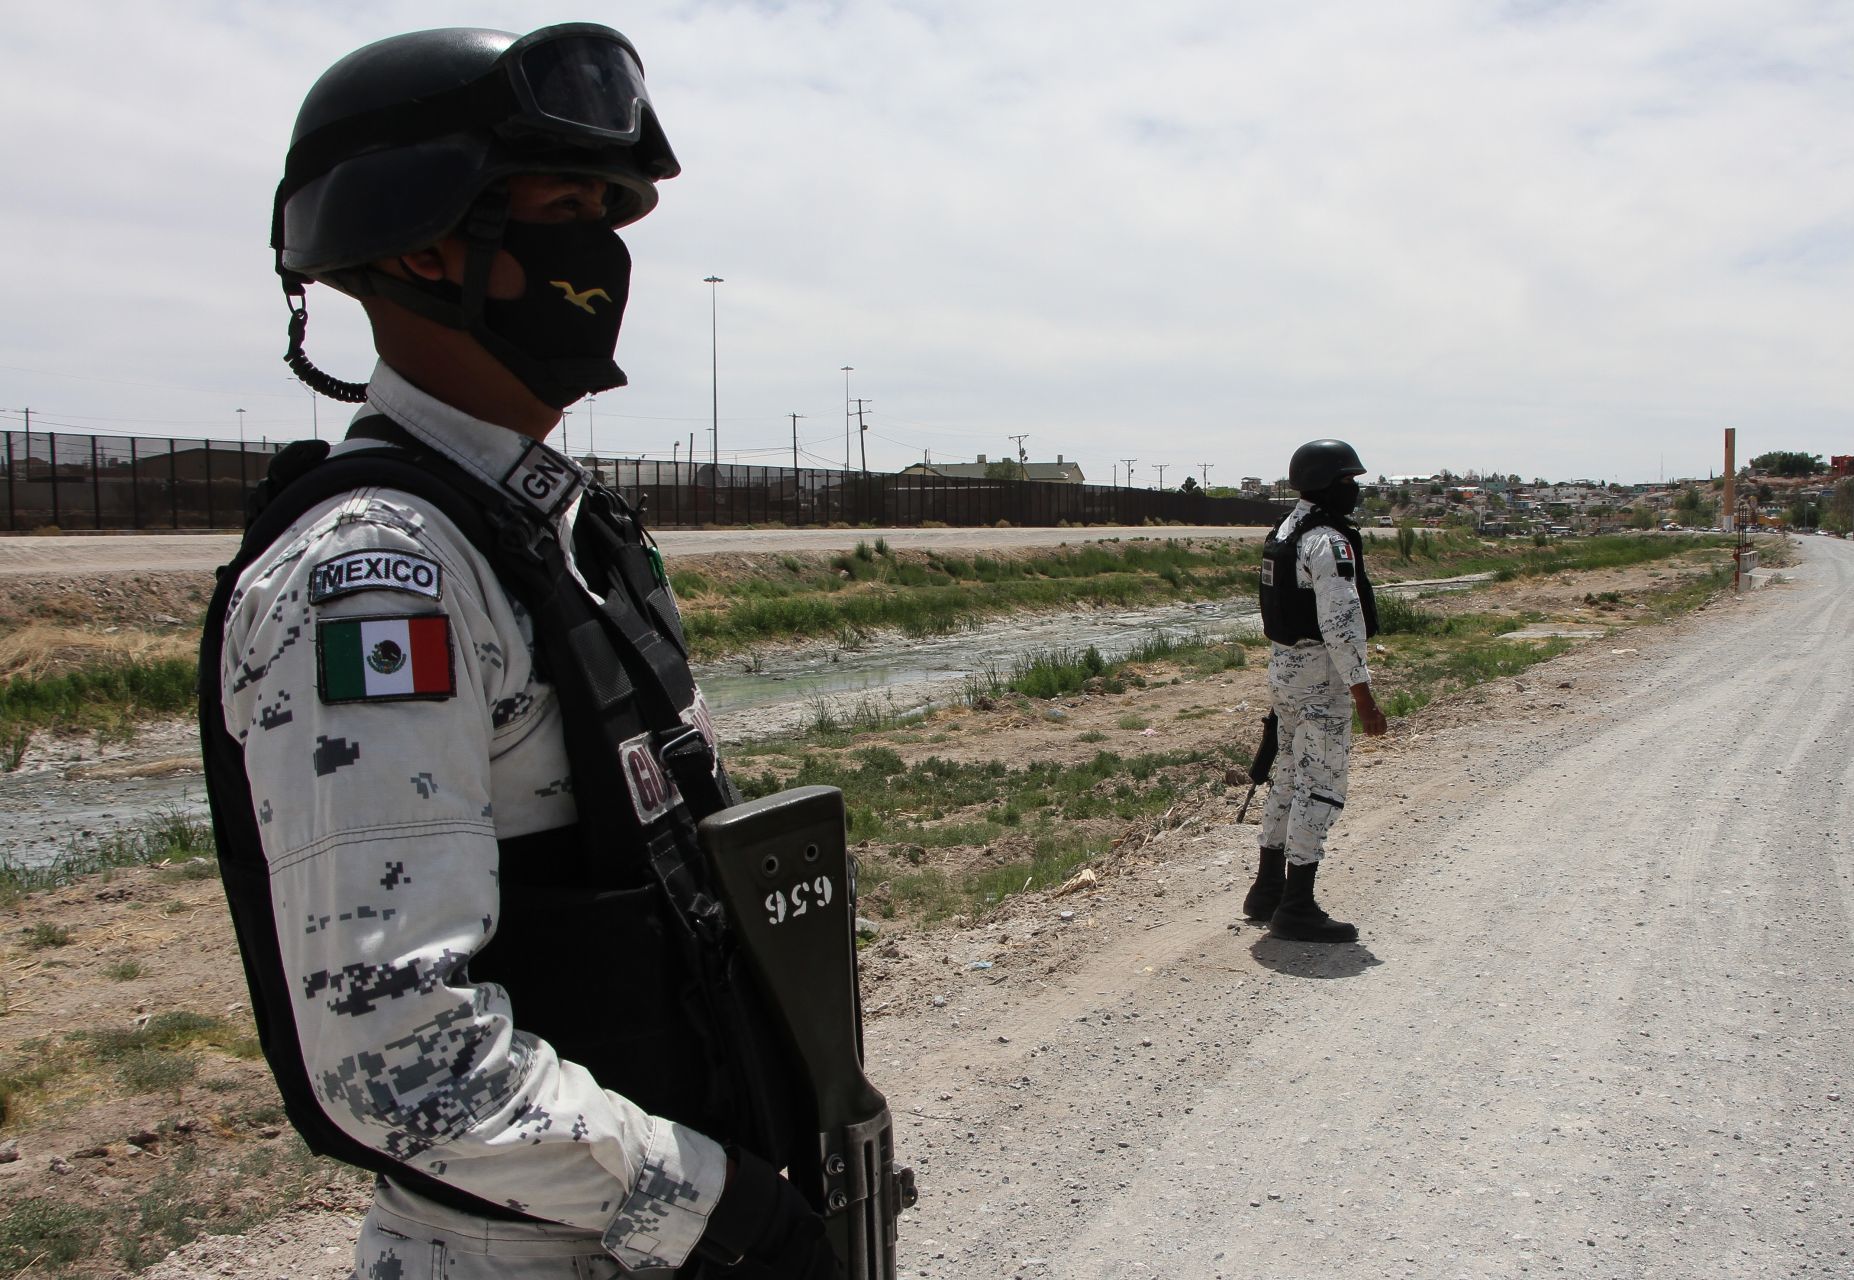 Two possible culprits of massacre arrested in Reynosa, Tamaulipas